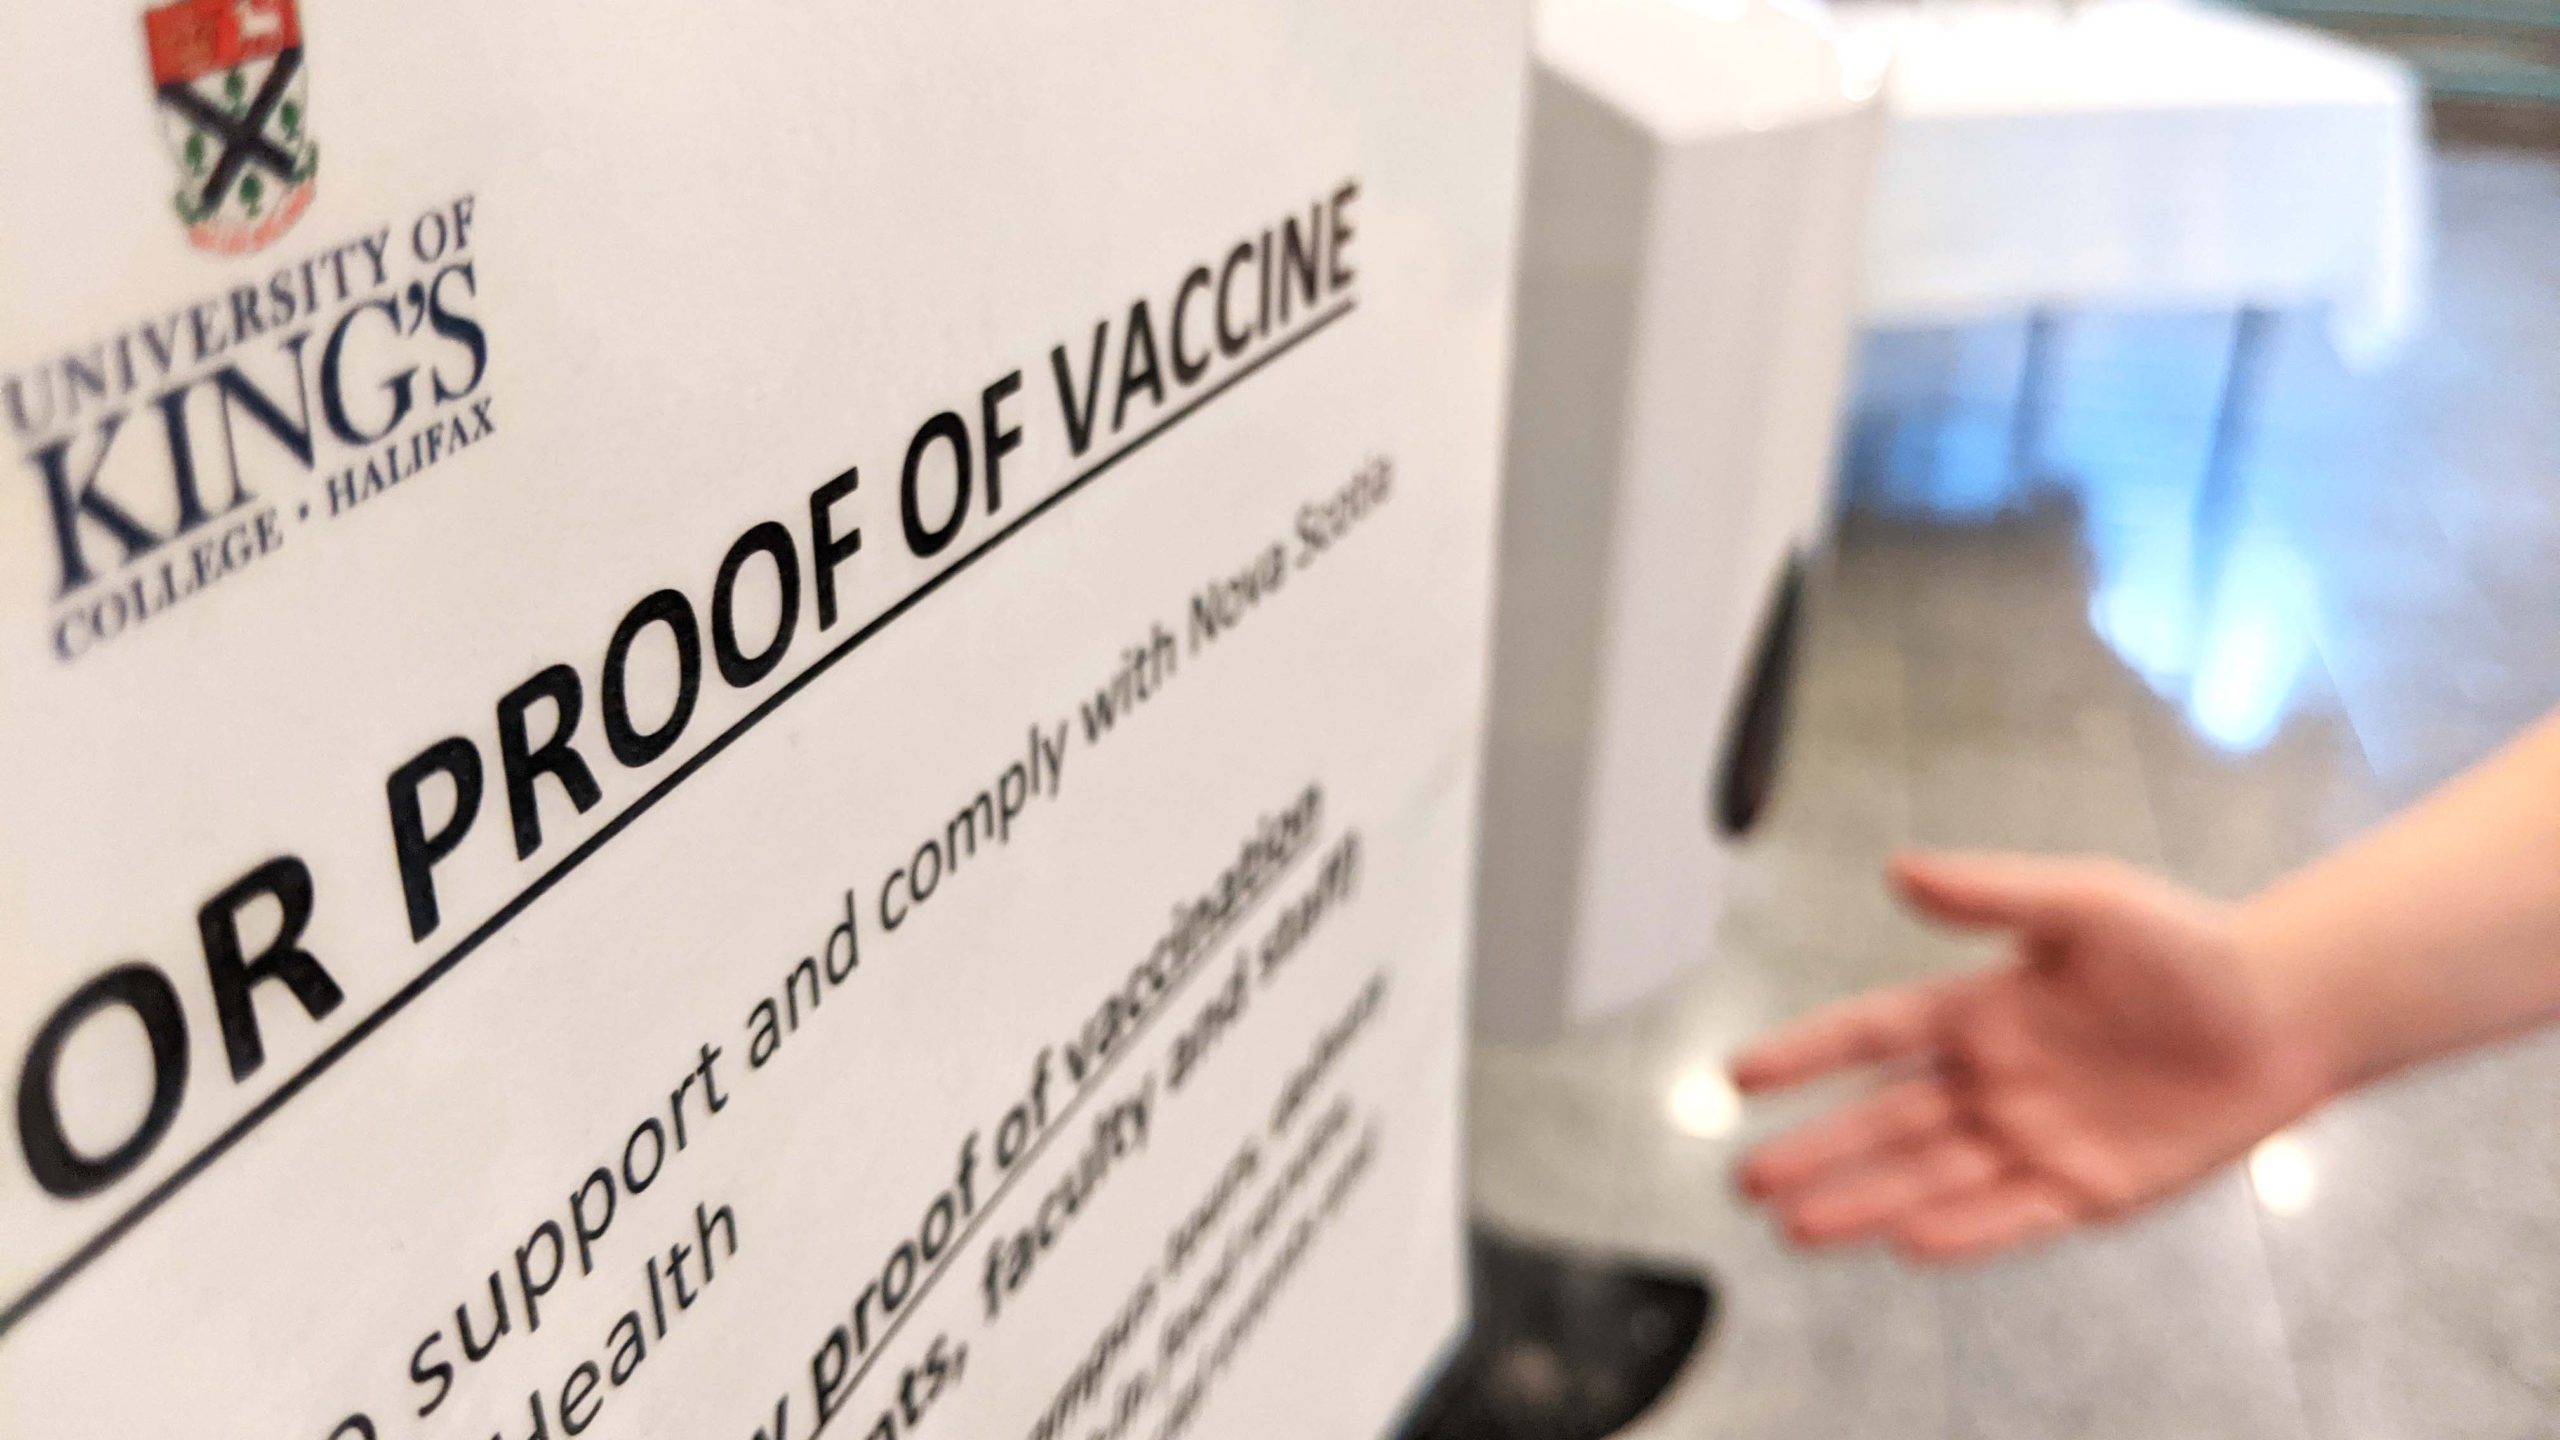 A proof of vaccination requirement sign sits in the foreground while a hand reaches for sanitizer behind it.